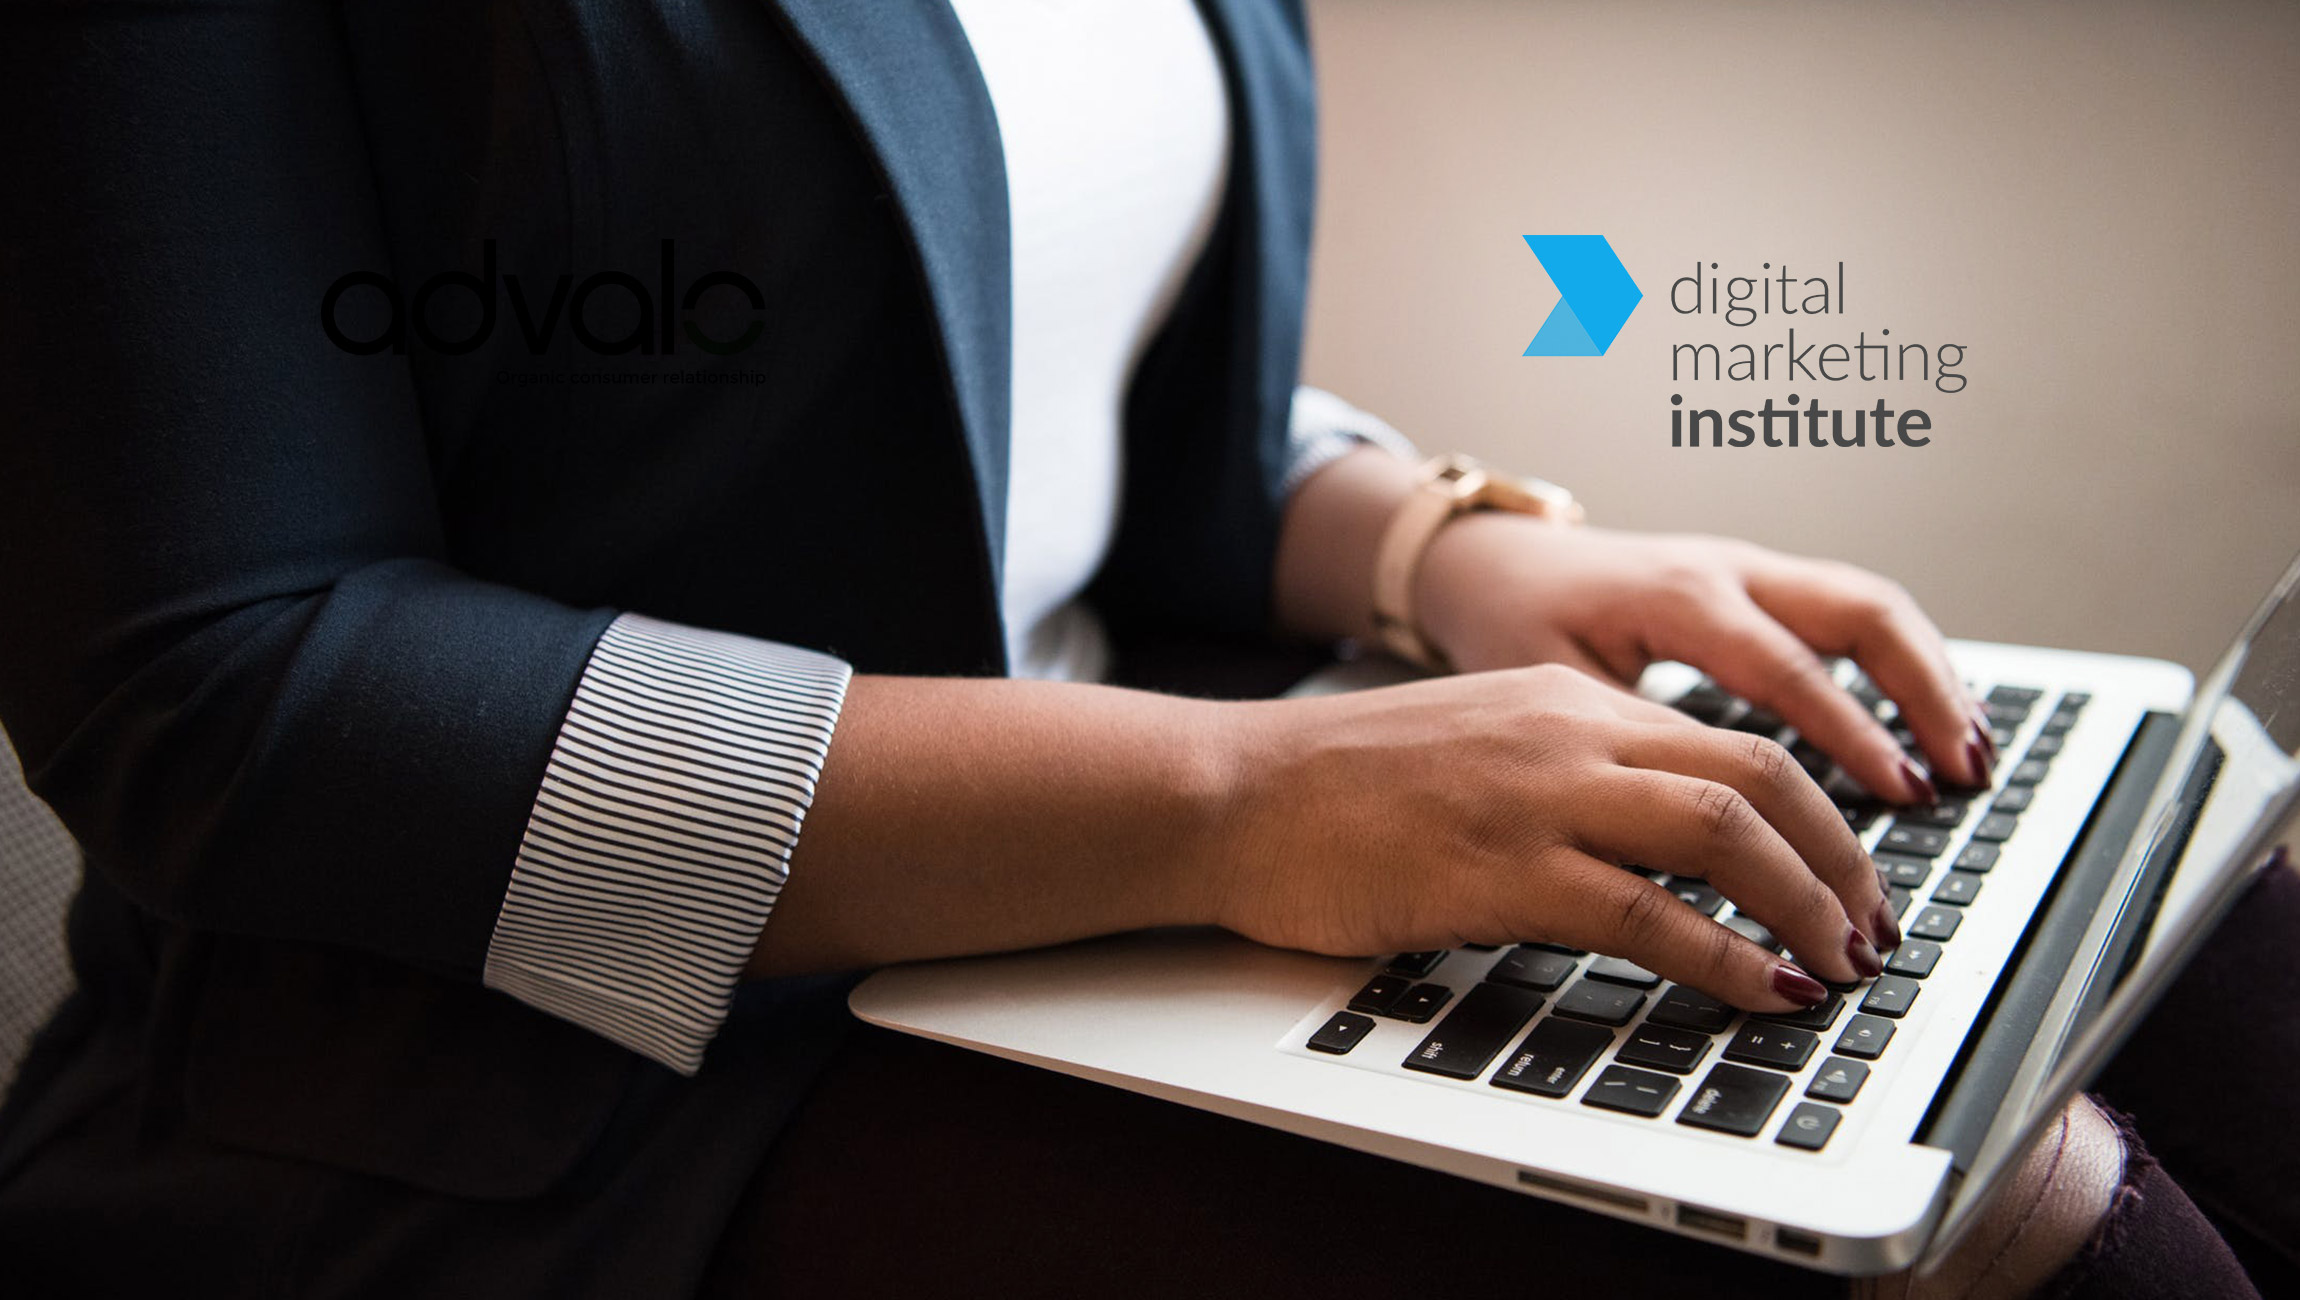 Digital Marketing Institute And The IAB Join Forces To Empower Lifelong Learning And Career Advancement